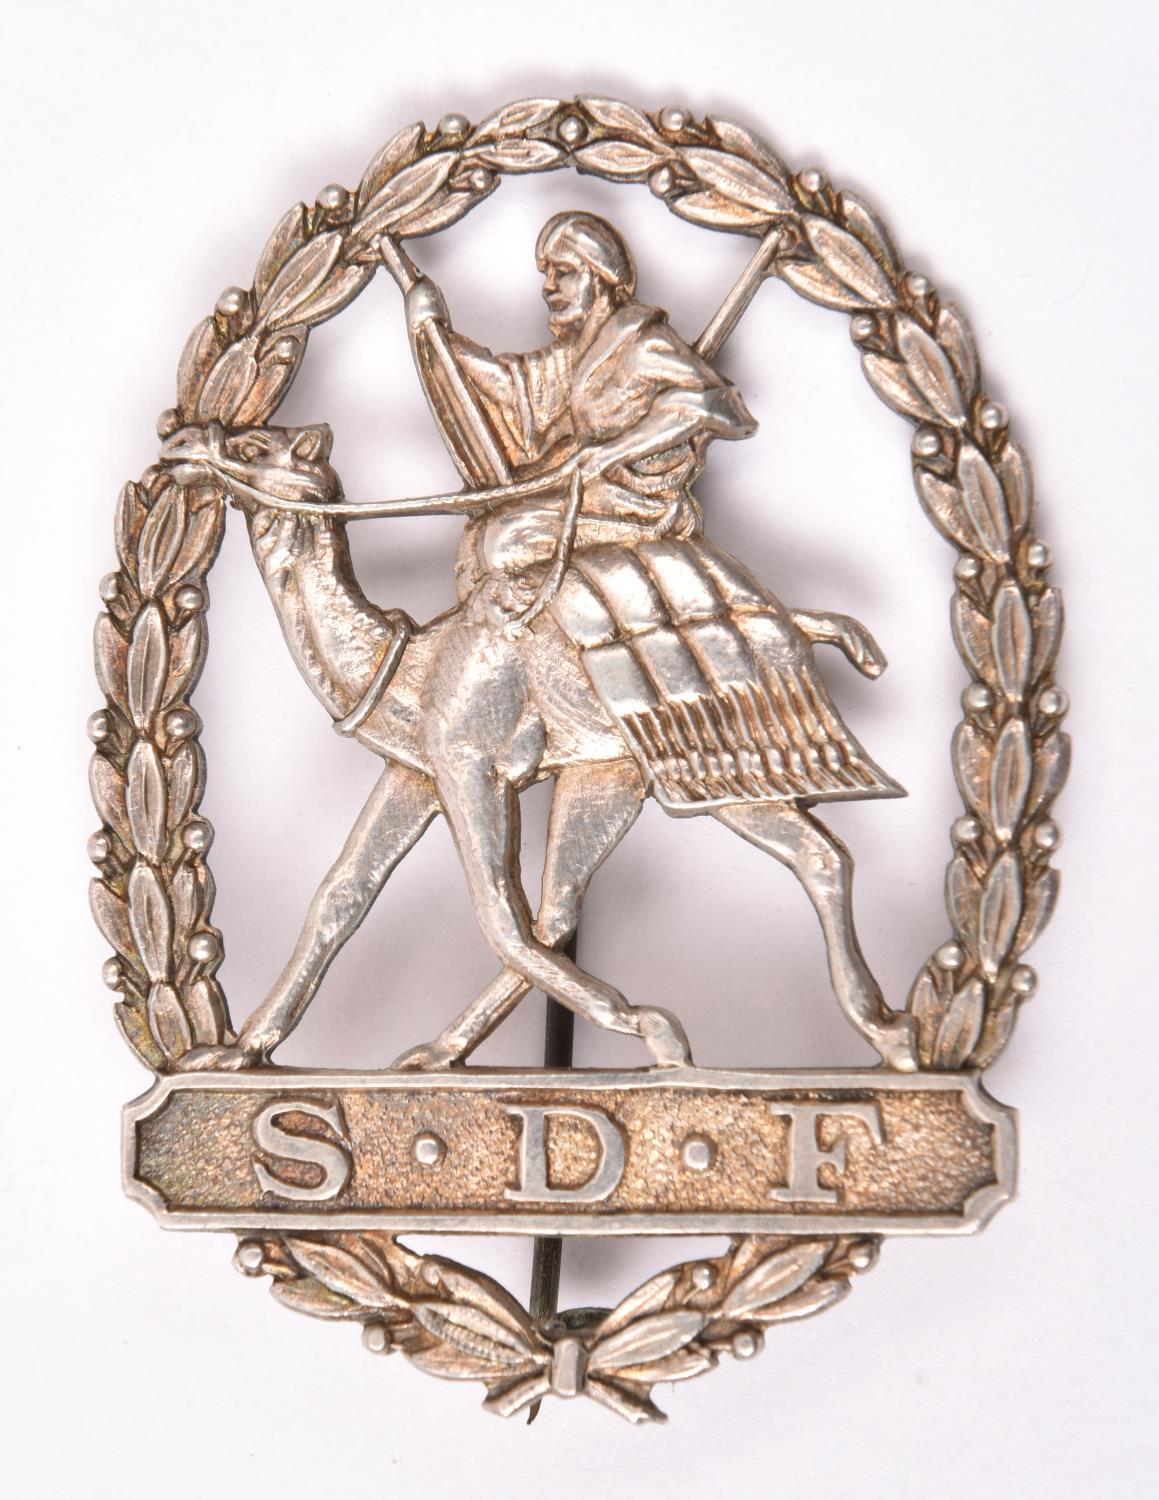 An Officer’s hall marked silver (1930) turban badge of the Sudan Defence Force, 2¼” x 1¾”, mounted